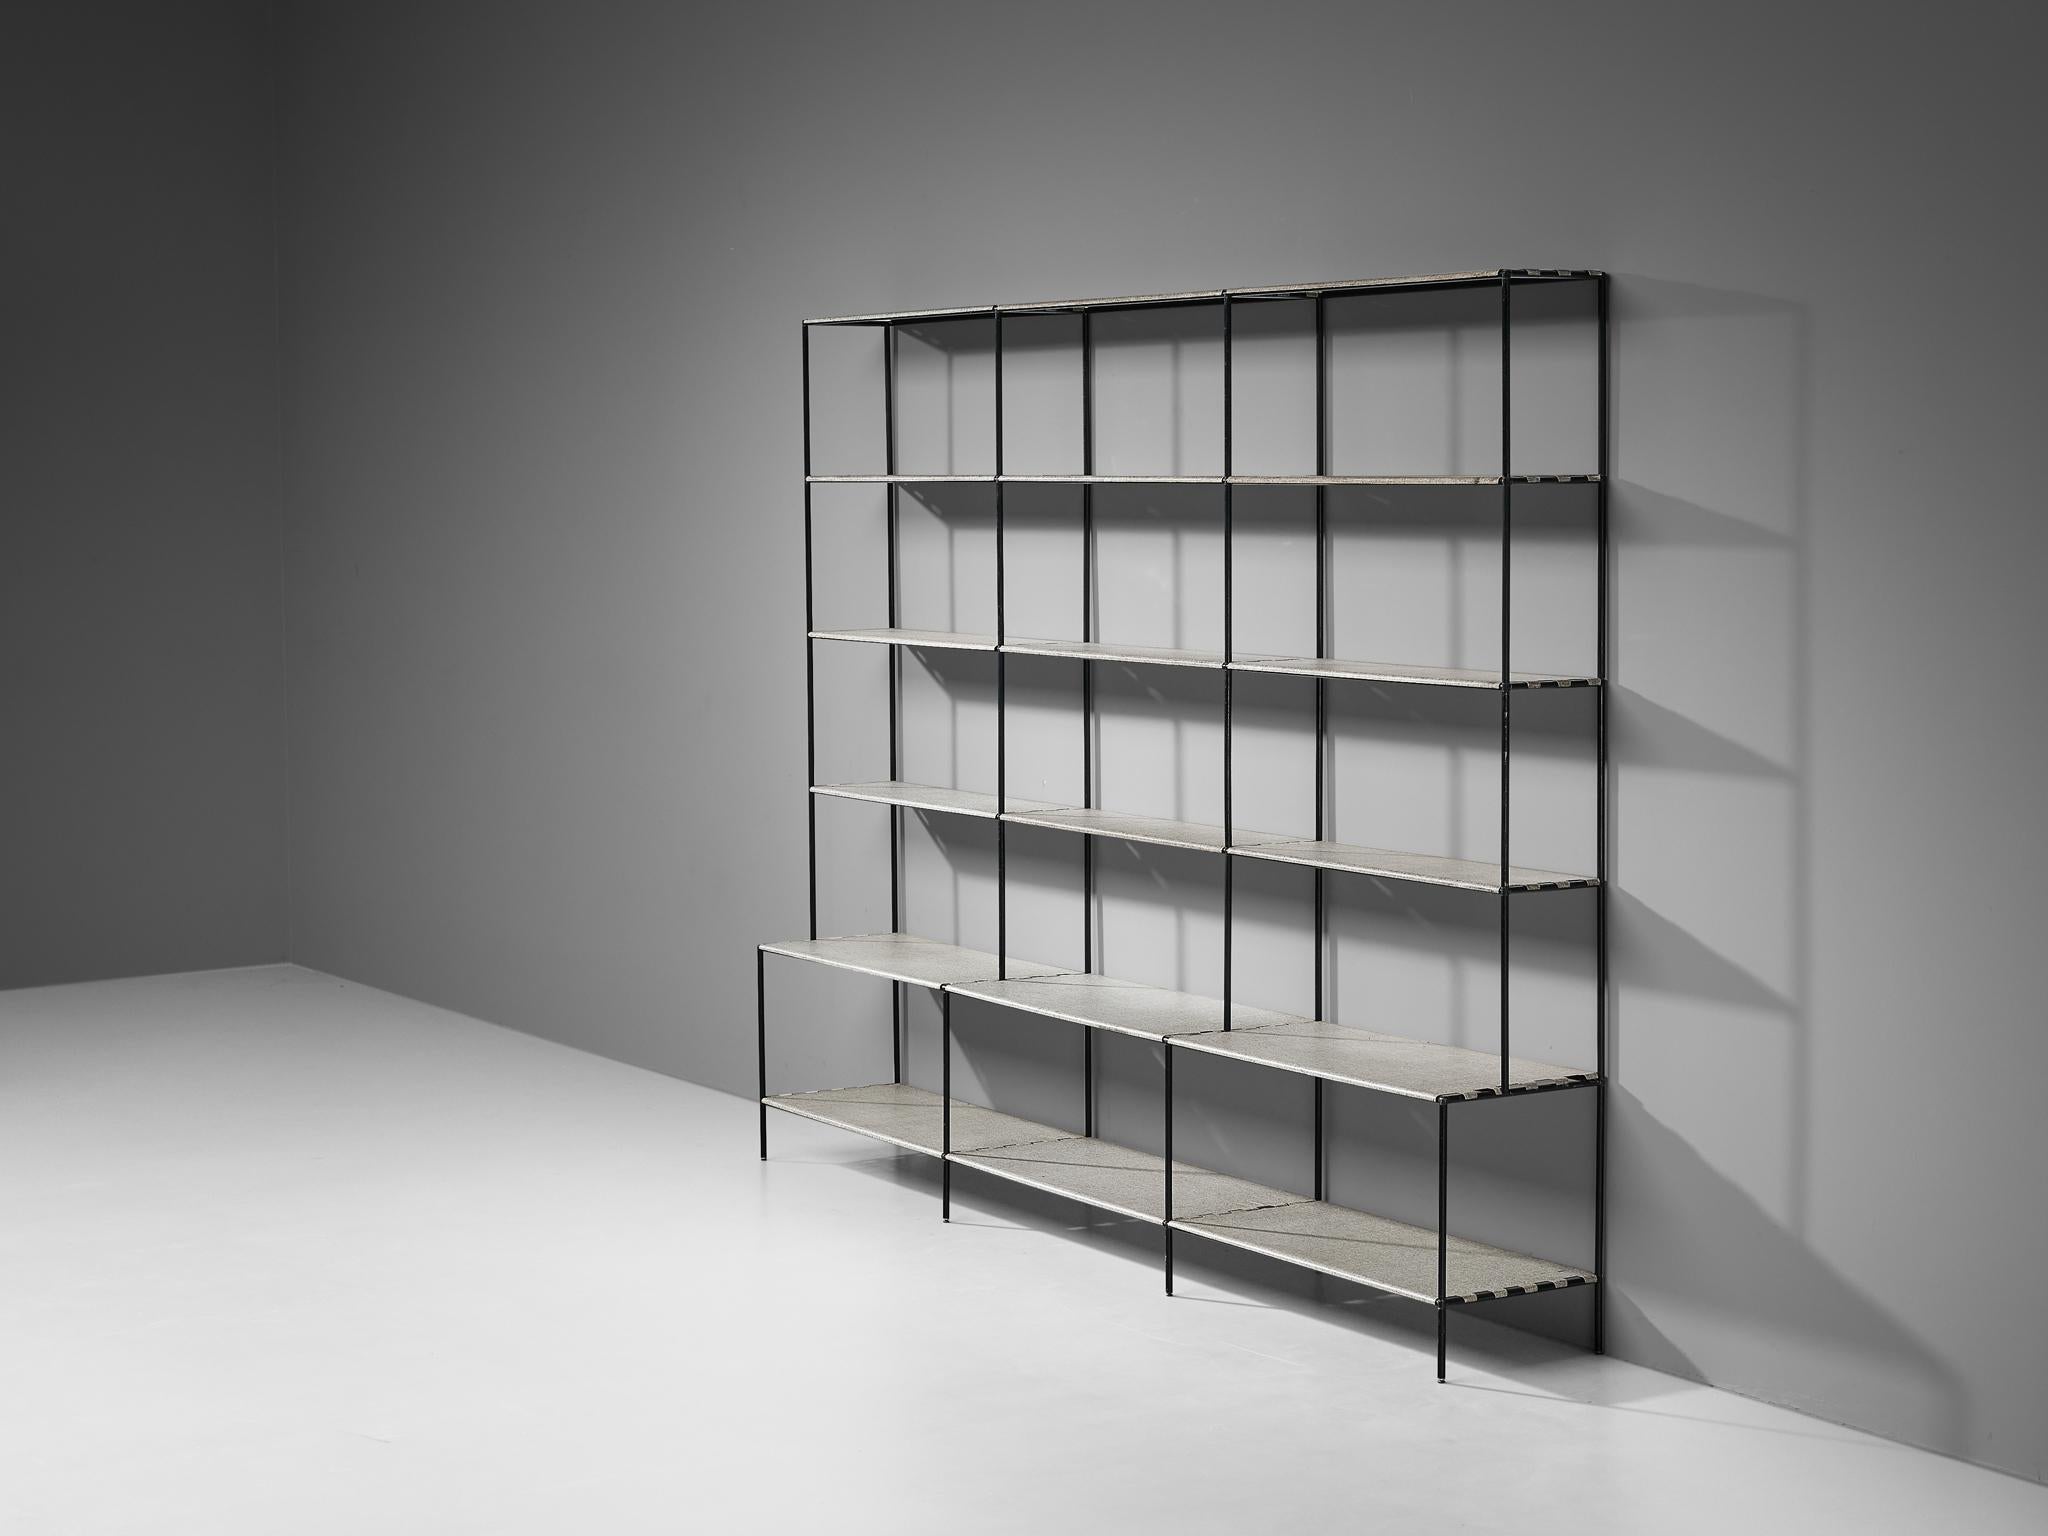 Poul Cadovius, open bookshelf or room divider, metal, Denmark, 1960s

This sizable and minimalist shelving unit was designed by Poul Cadovius. This shelving system exists of a thin frame in black metal to which shelves can be attached. Three open